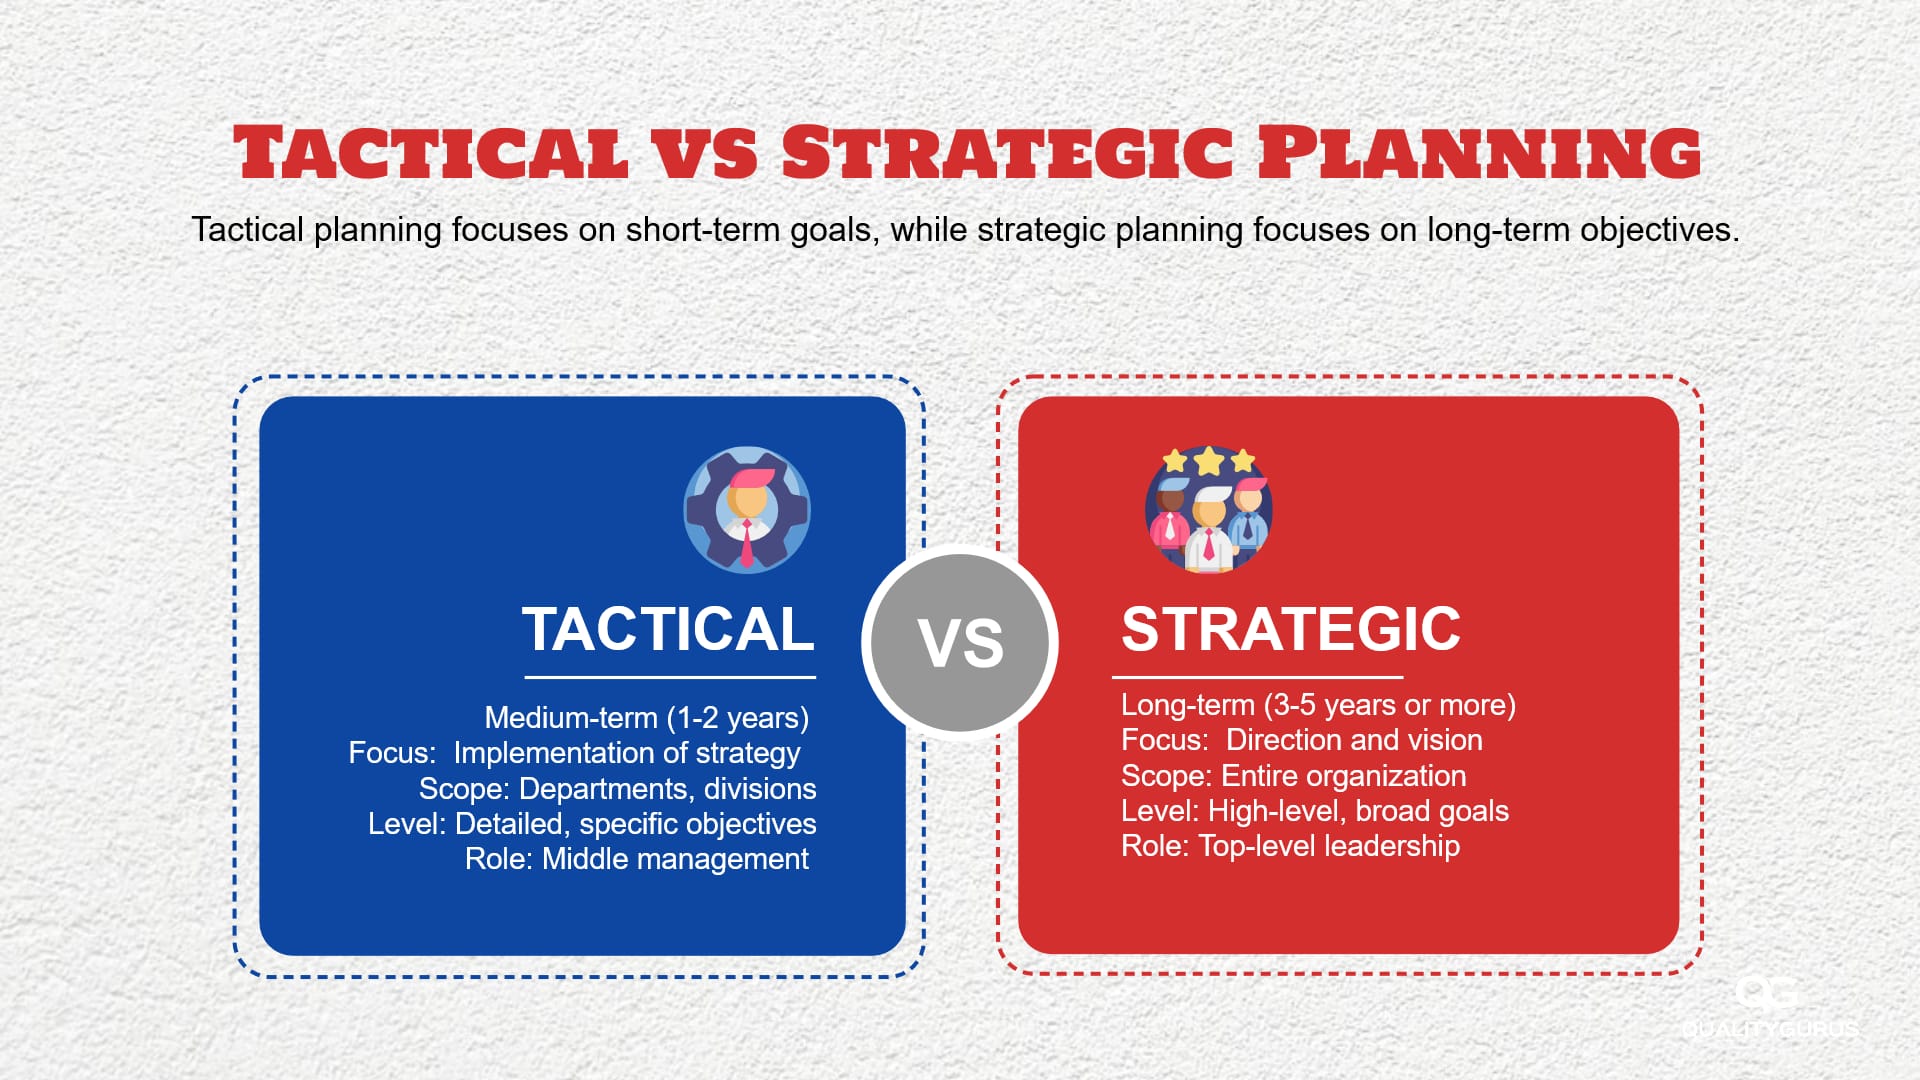 Tactical vs Strategic Planning: What's the Difference?